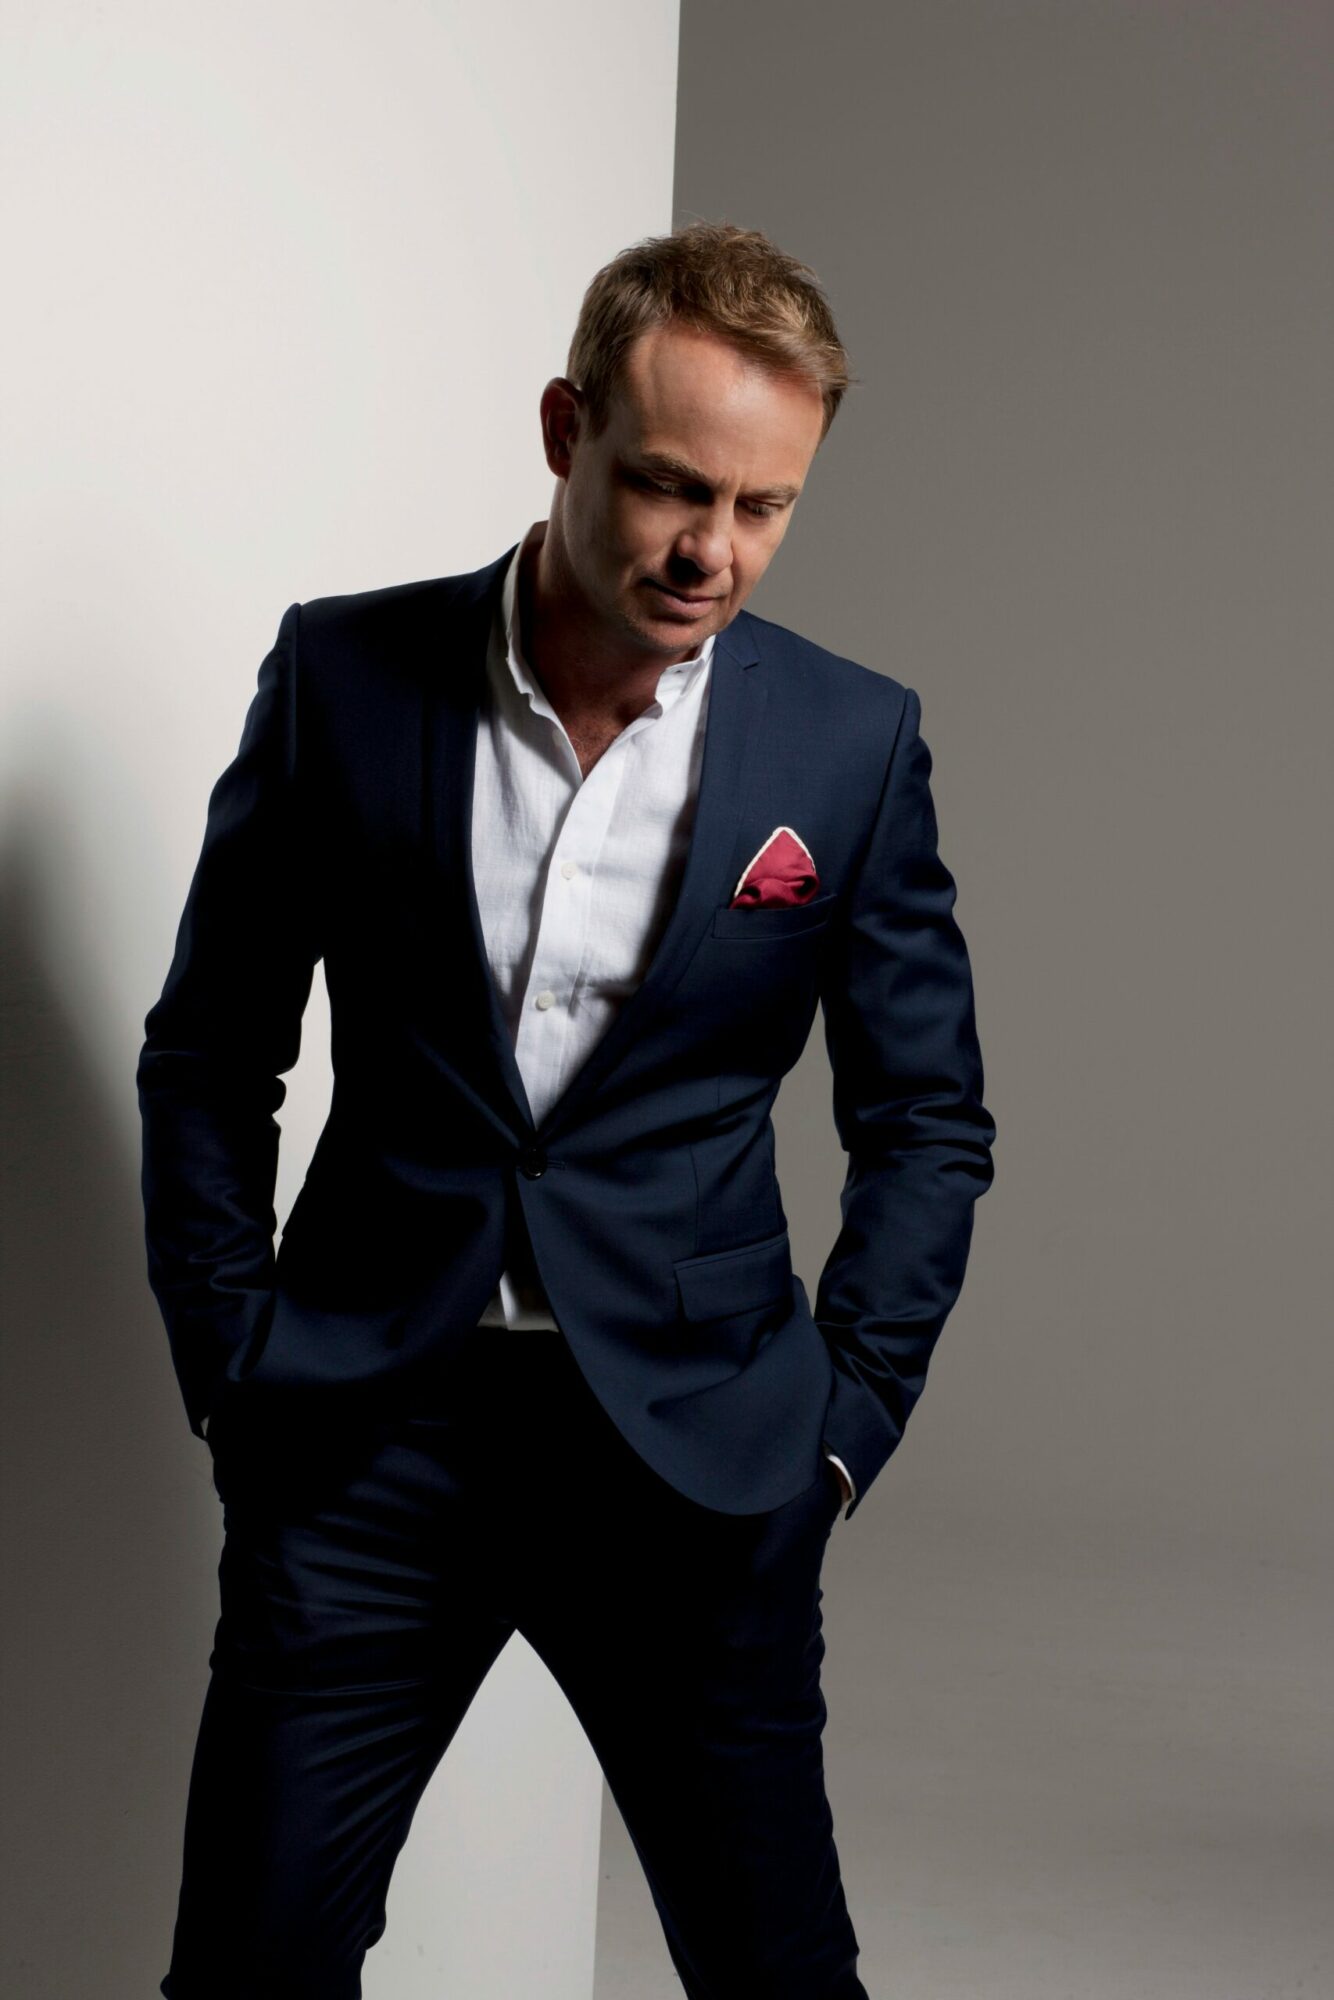 Image name Jason Donovan DOIN FINE 25 at York Barbican York scaled the 28 image from the post Jason Donovan - DOIN' FINE 25 at York Barbican, York in Yorkshire.com.